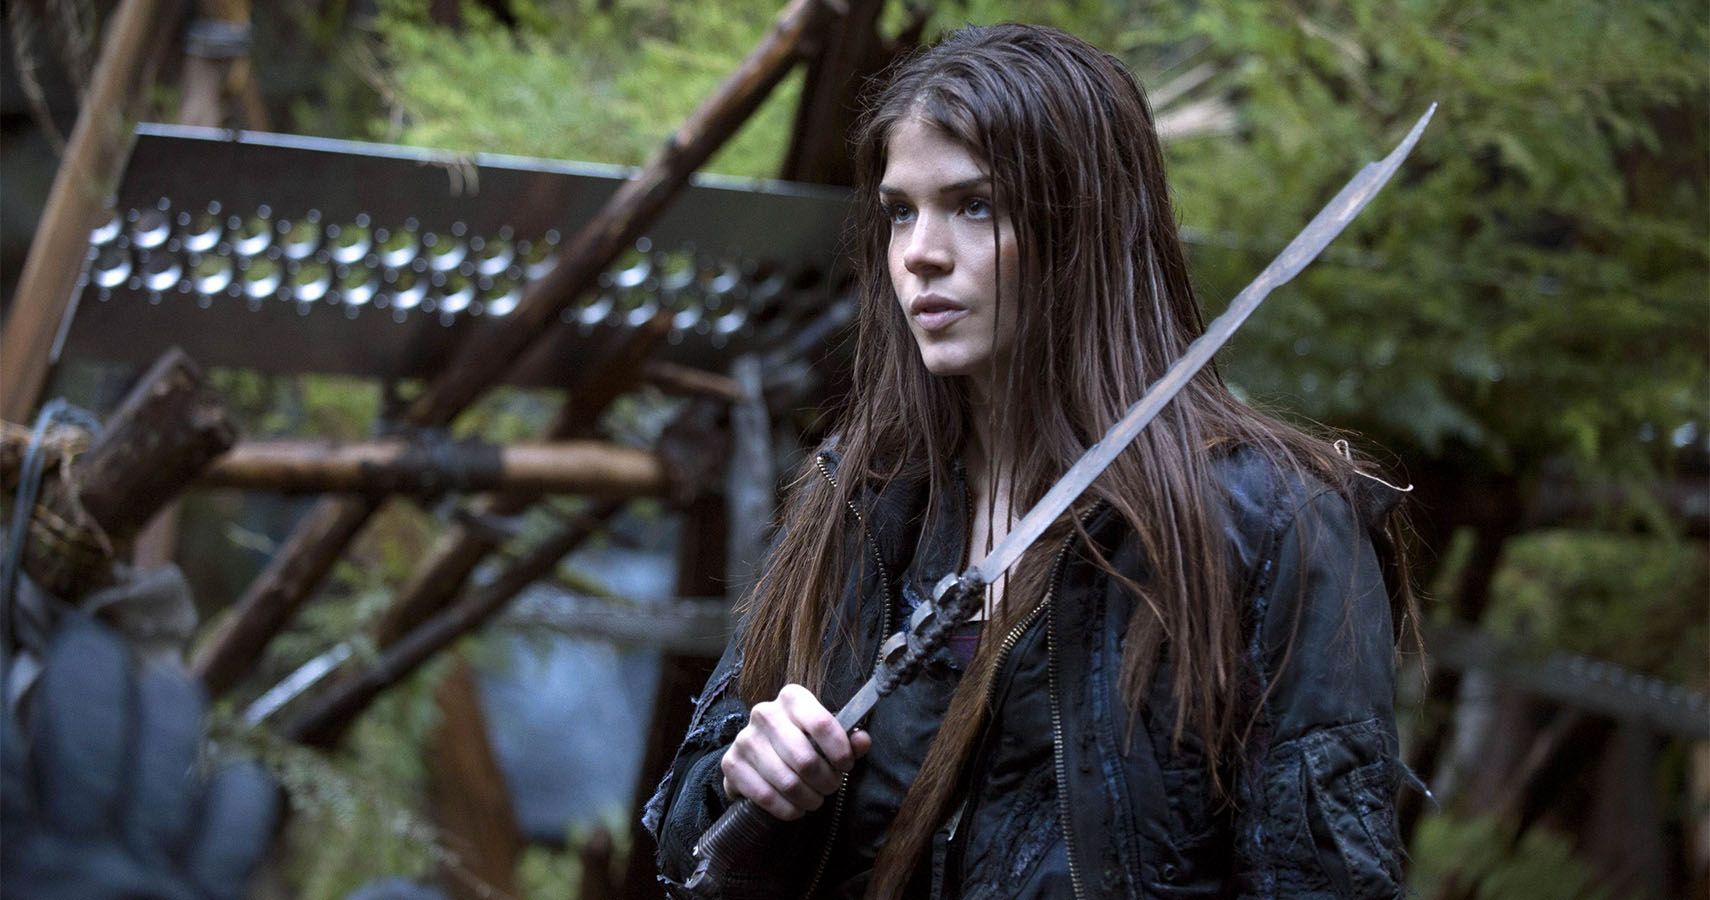 The 100 5 Characters That Will Likely Survive the Final Season (& 5 That Likely Won’t)